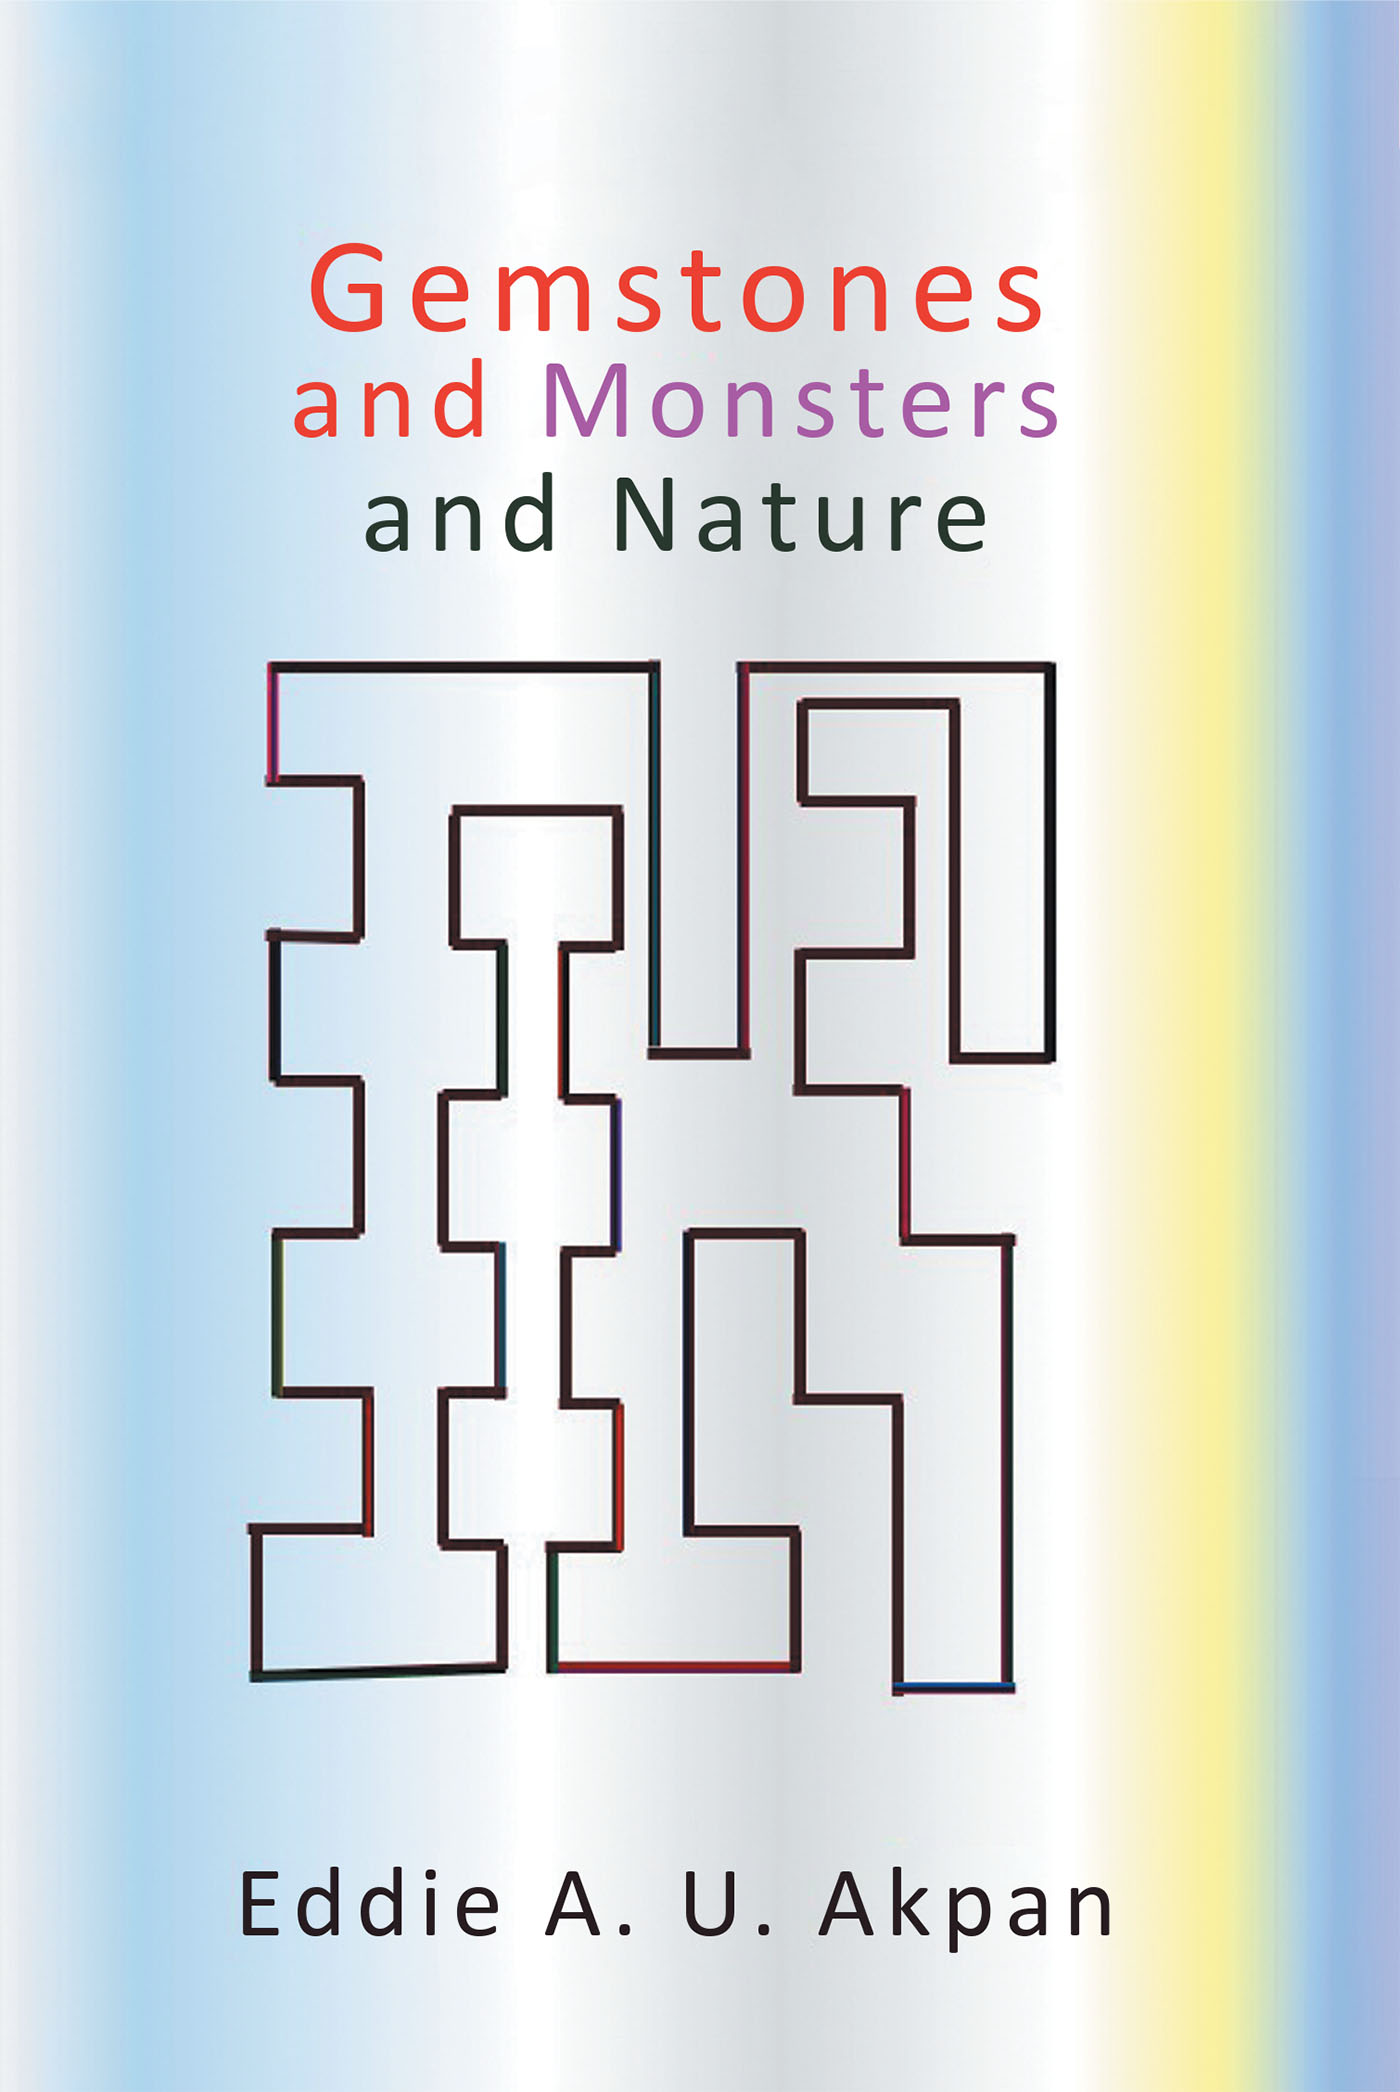 Author Eddie A. U. Akpan’s New Book, "Gemstones and Monsters and Nature," is an Eye Opening Analysis That Reveals the Most Important Tool to Guide Humans Through Life